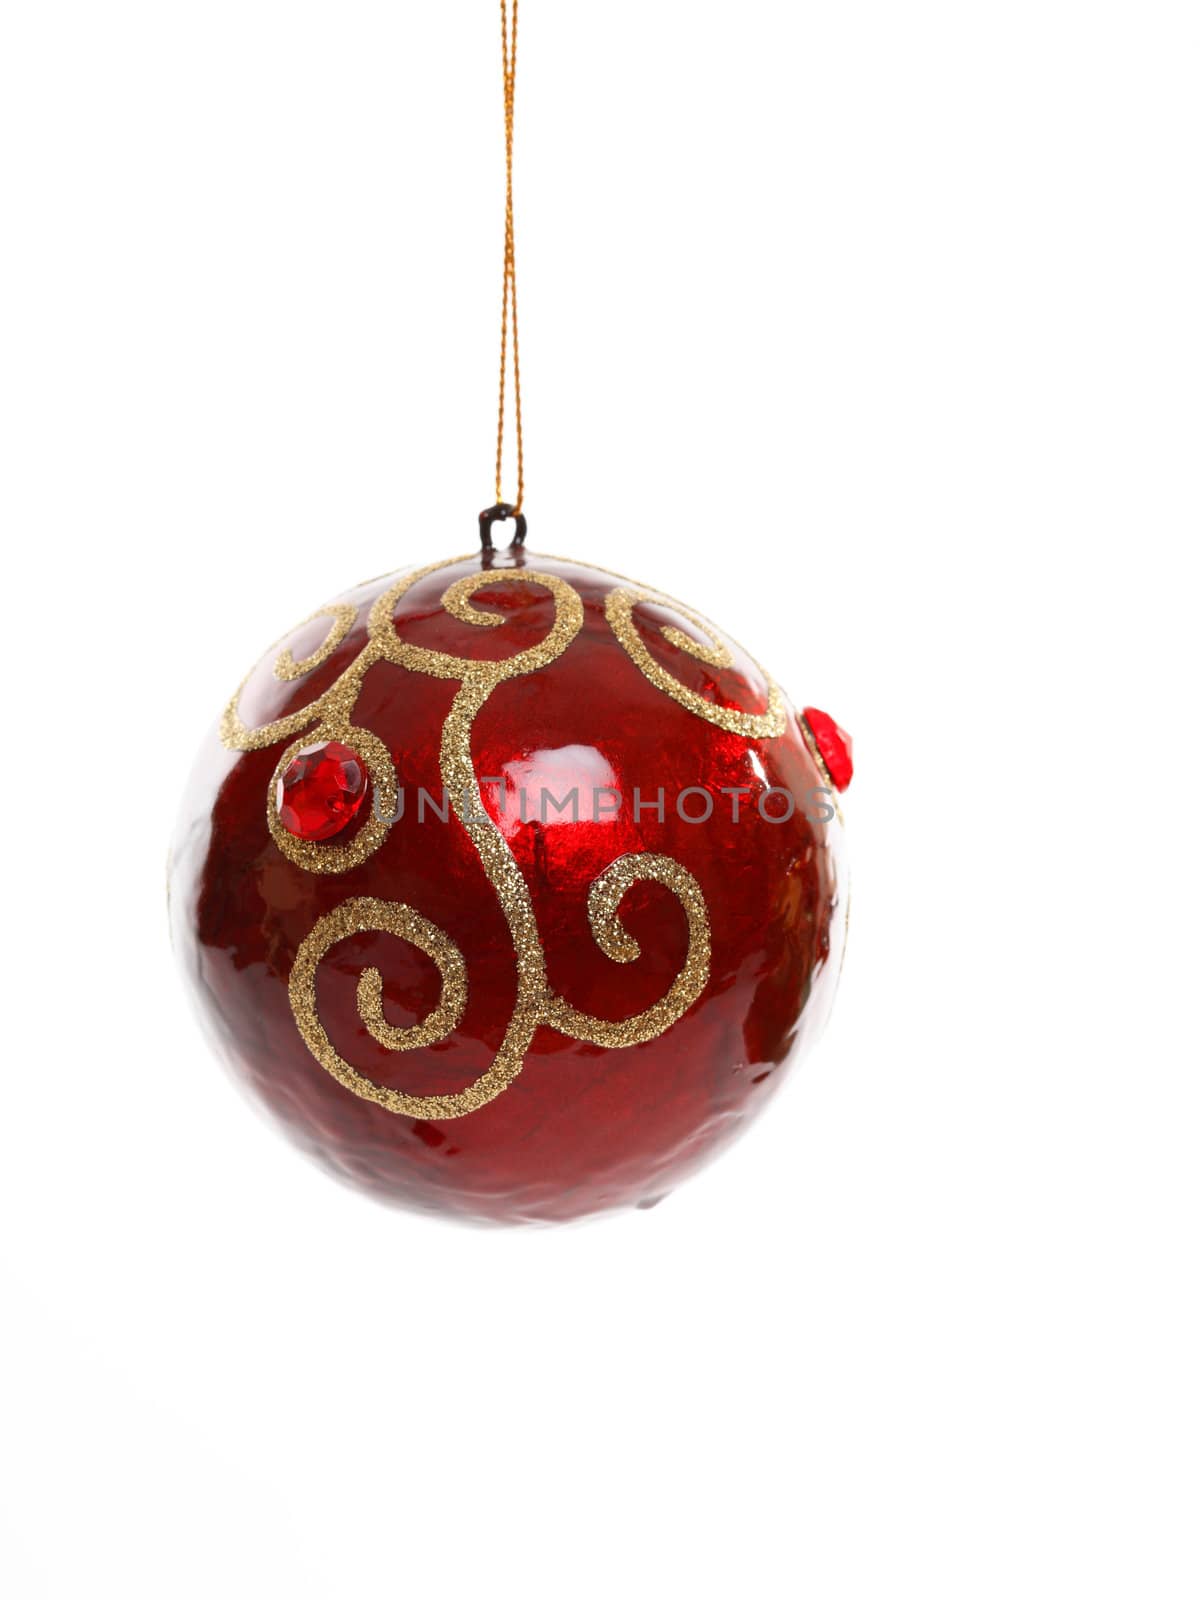 Decorated Christmas Ball by lovleah